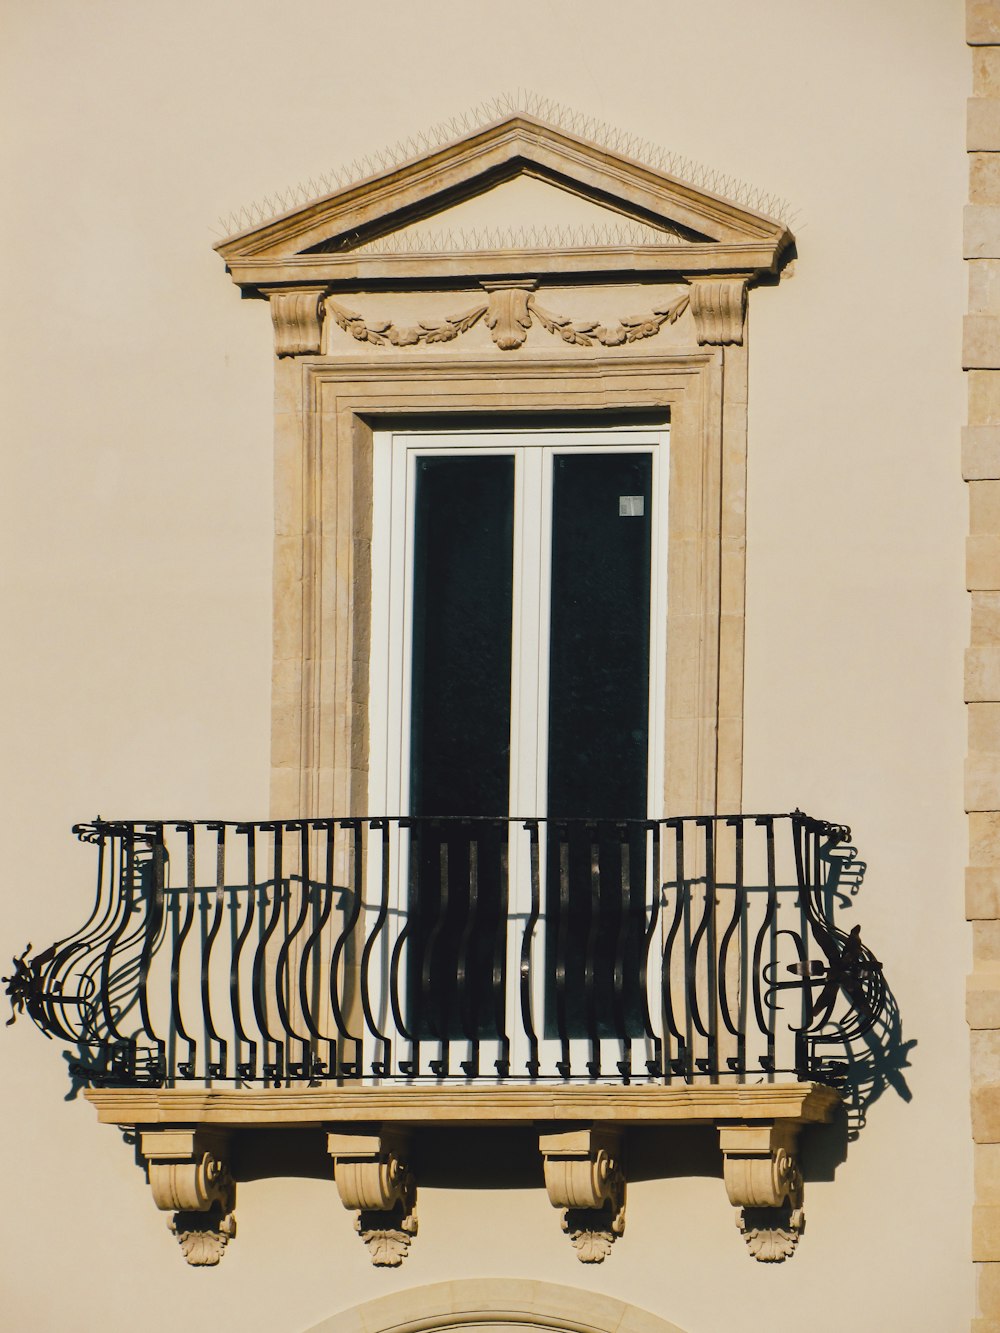 a balcony with wrought iron railing and a clock